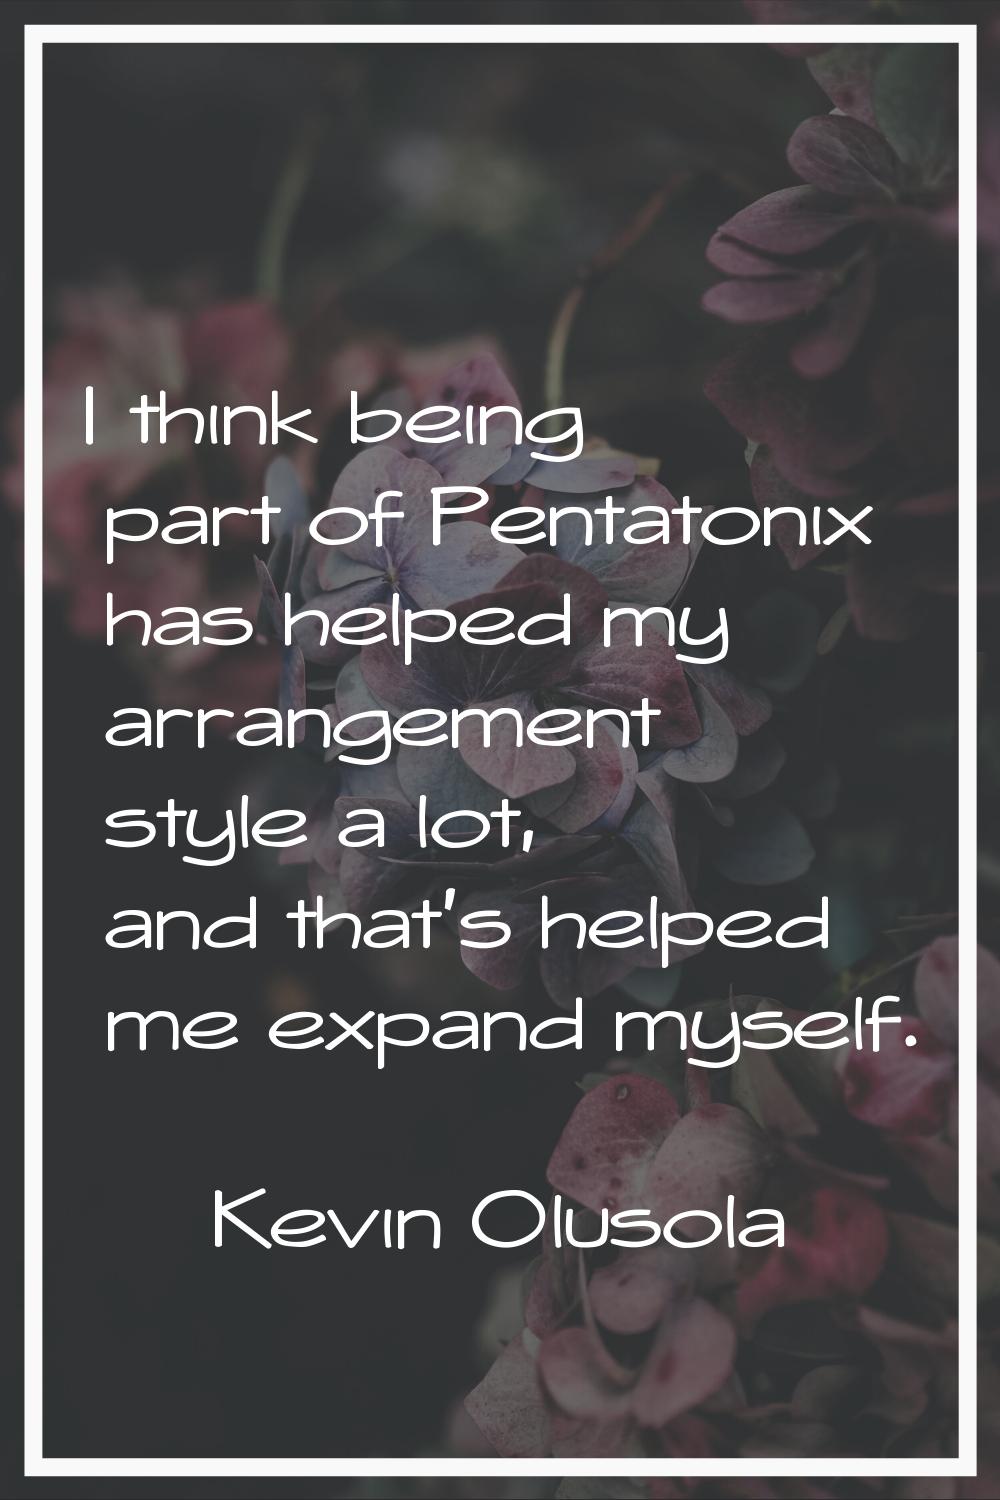 I think being part of Pentatonix has helped my arrangement style a lot, and that's helped me expand